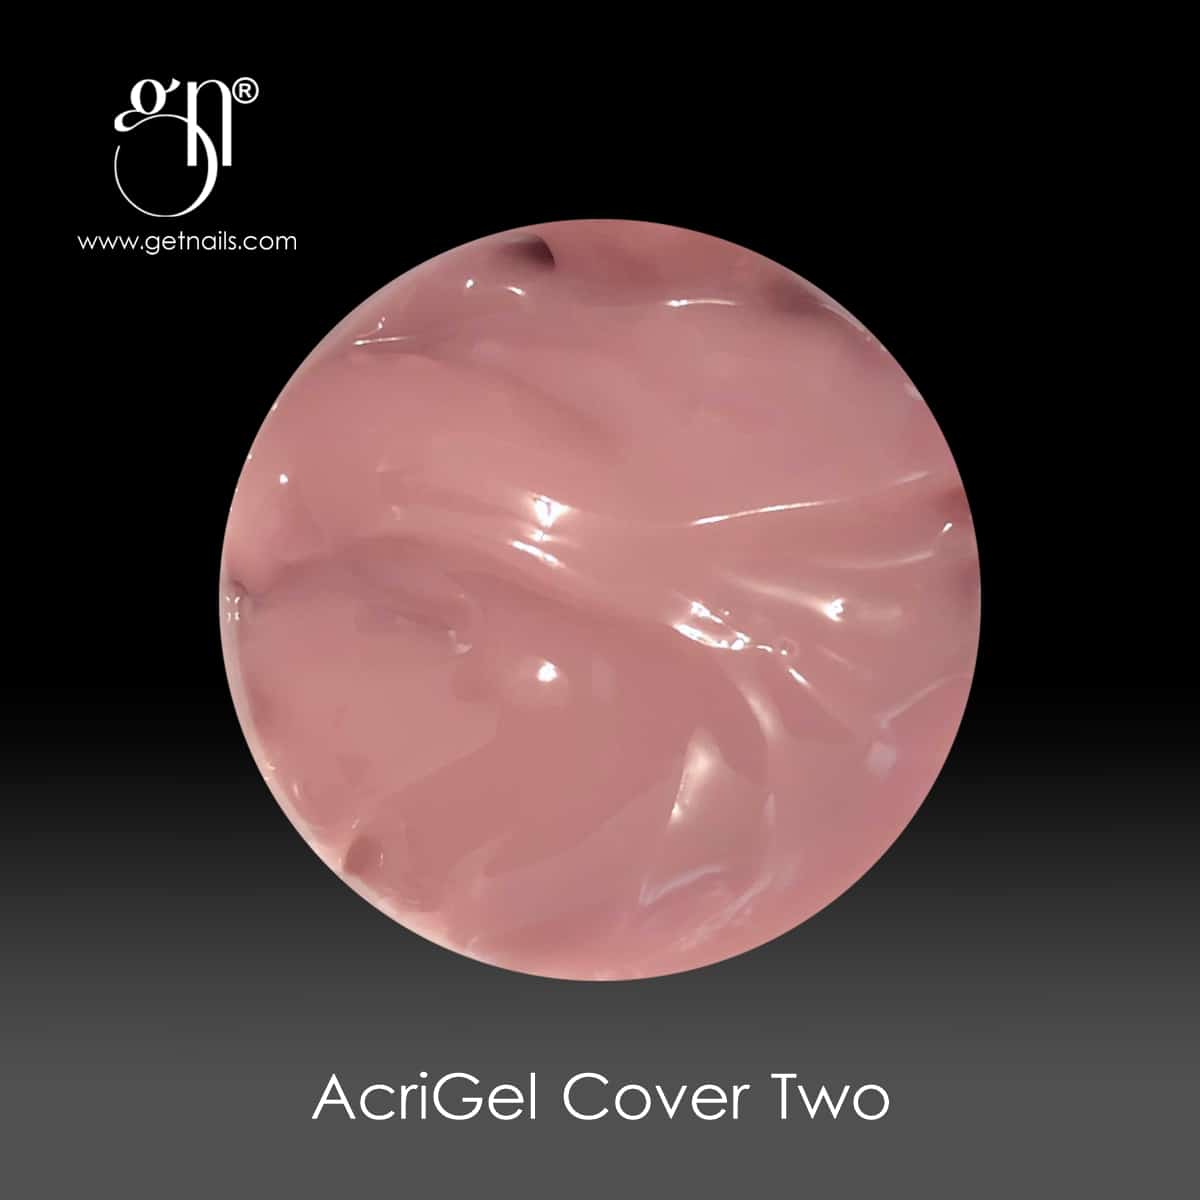 Nabavite Nails Austria - AcriGel Cover Two 50g